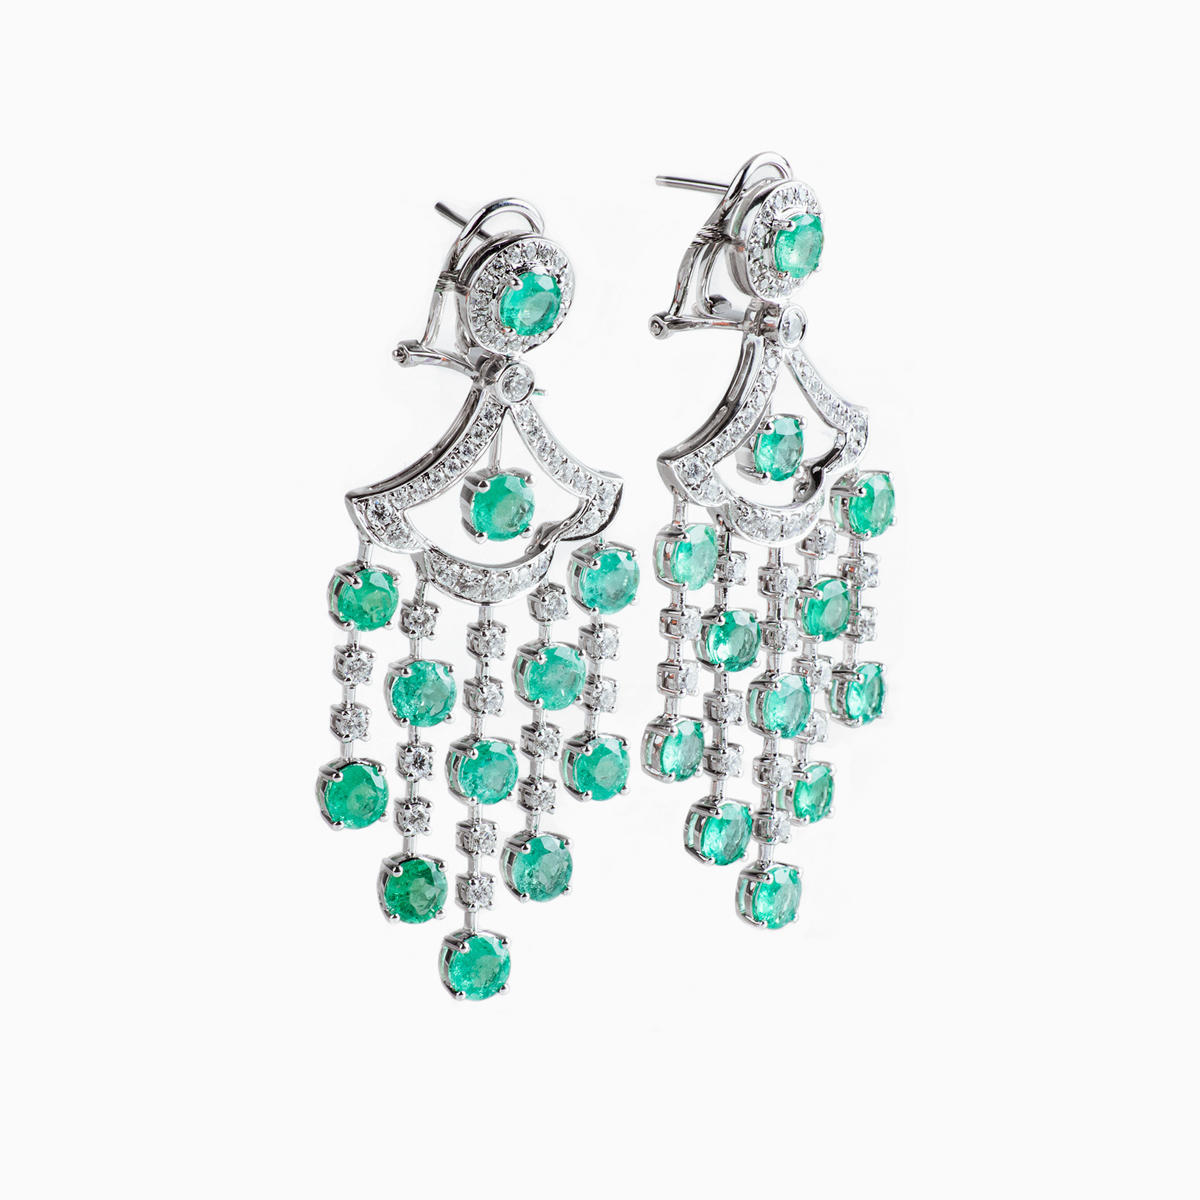 Cocktail Round Emerald and Diamond Chandelier Earrings, 18k White Gold